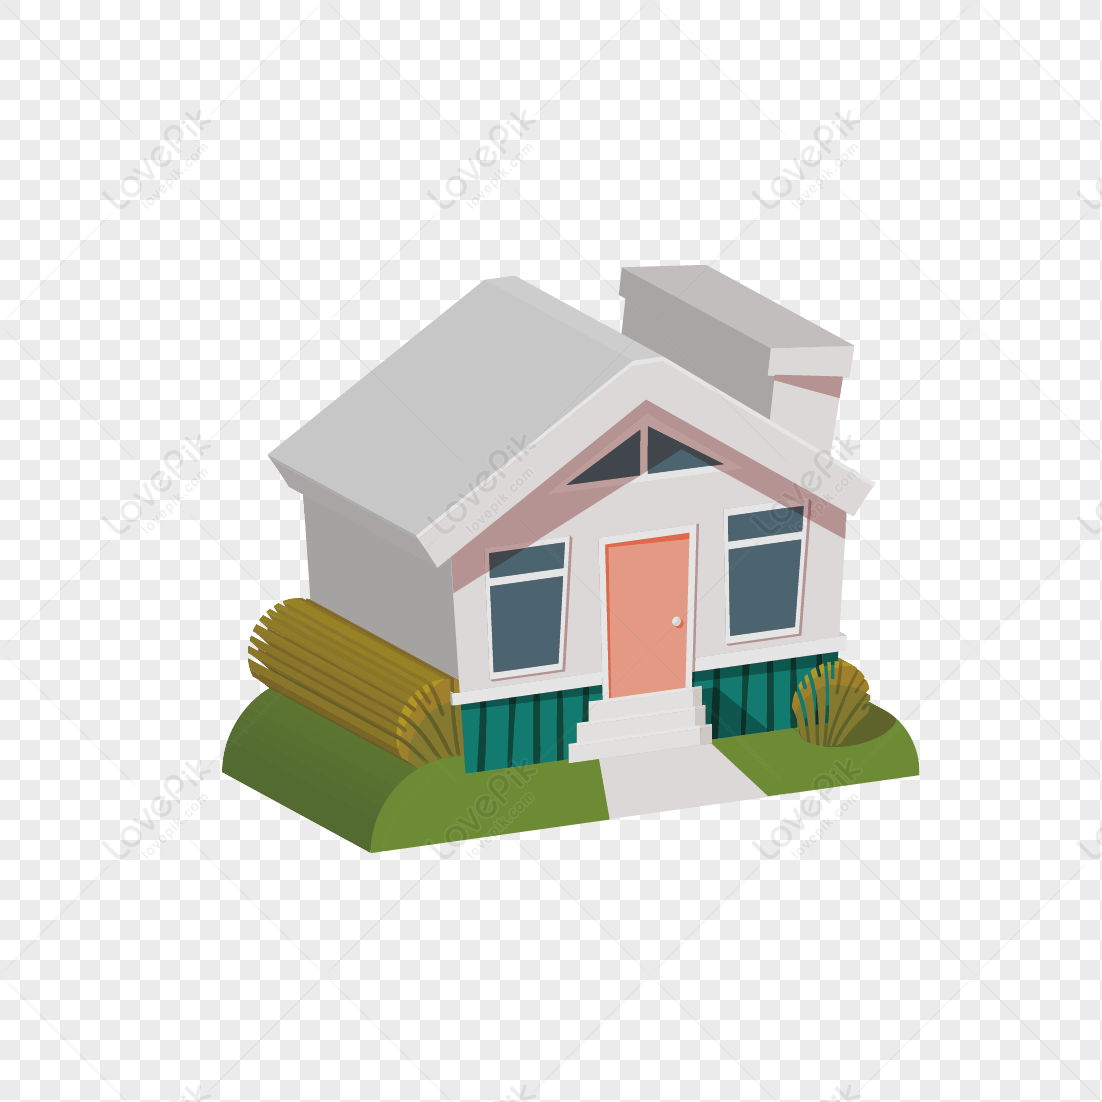 House Free PNG And Clipart Image For Free Download - Lovepik | 400255089